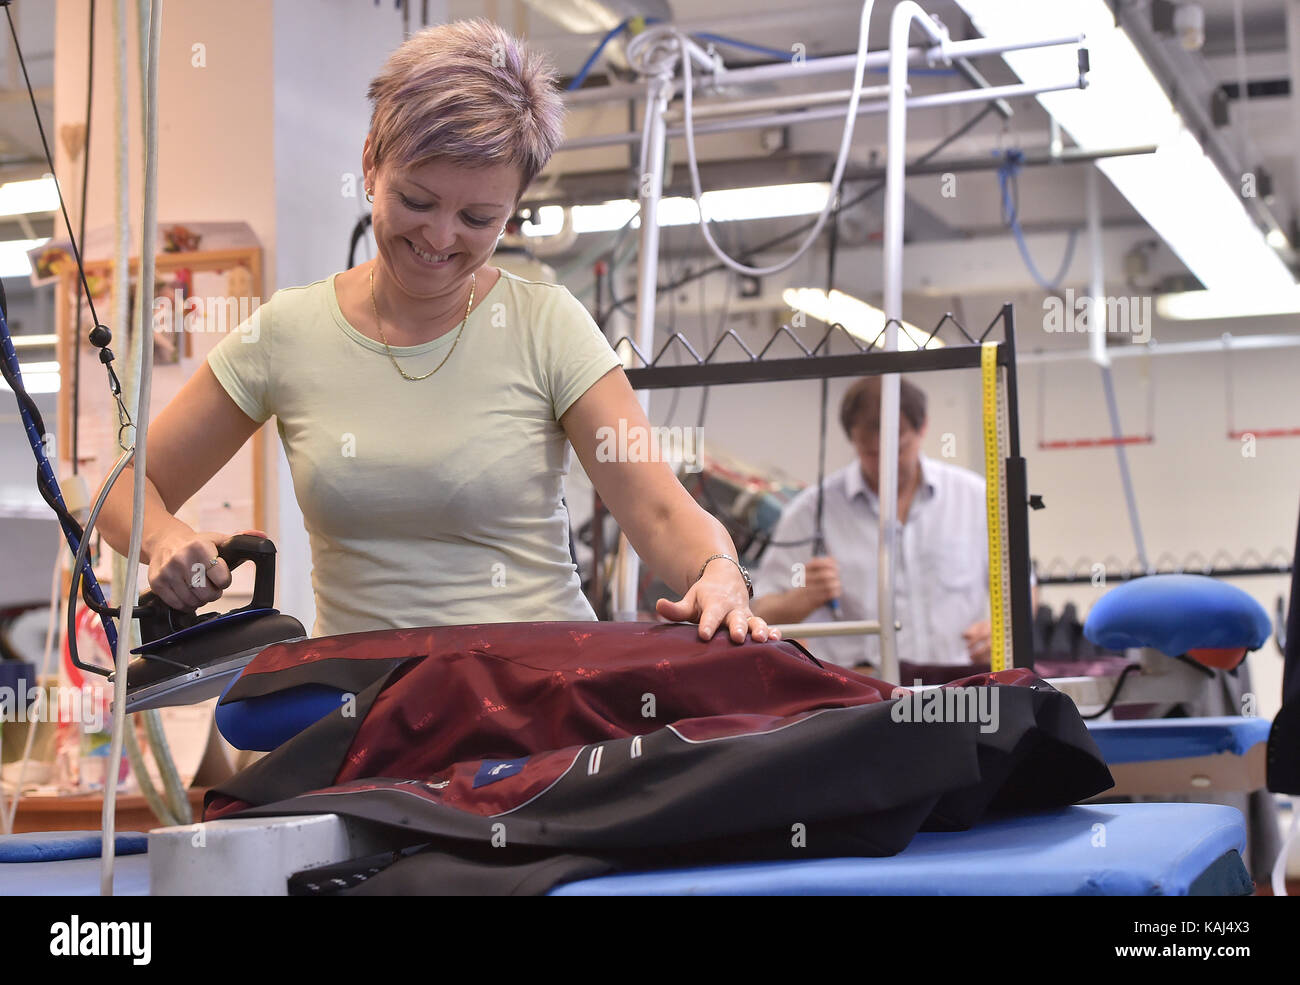 Trest, Czech Republic. 25th Sep, 2017. Trest clothing cooperative Vyvoj belongs to the largest clothing companies in Czech Republic, which kept their own production. Besides men's suits, the company sewing professional clothing for extreme conditions. On the photo is seen an ironing of suits, in the production plant in Trest, Czech Republic, on September 25, 2017. Credit: Lubos Pavlicek/CTK Photo/Alamy Live News Stock Photo